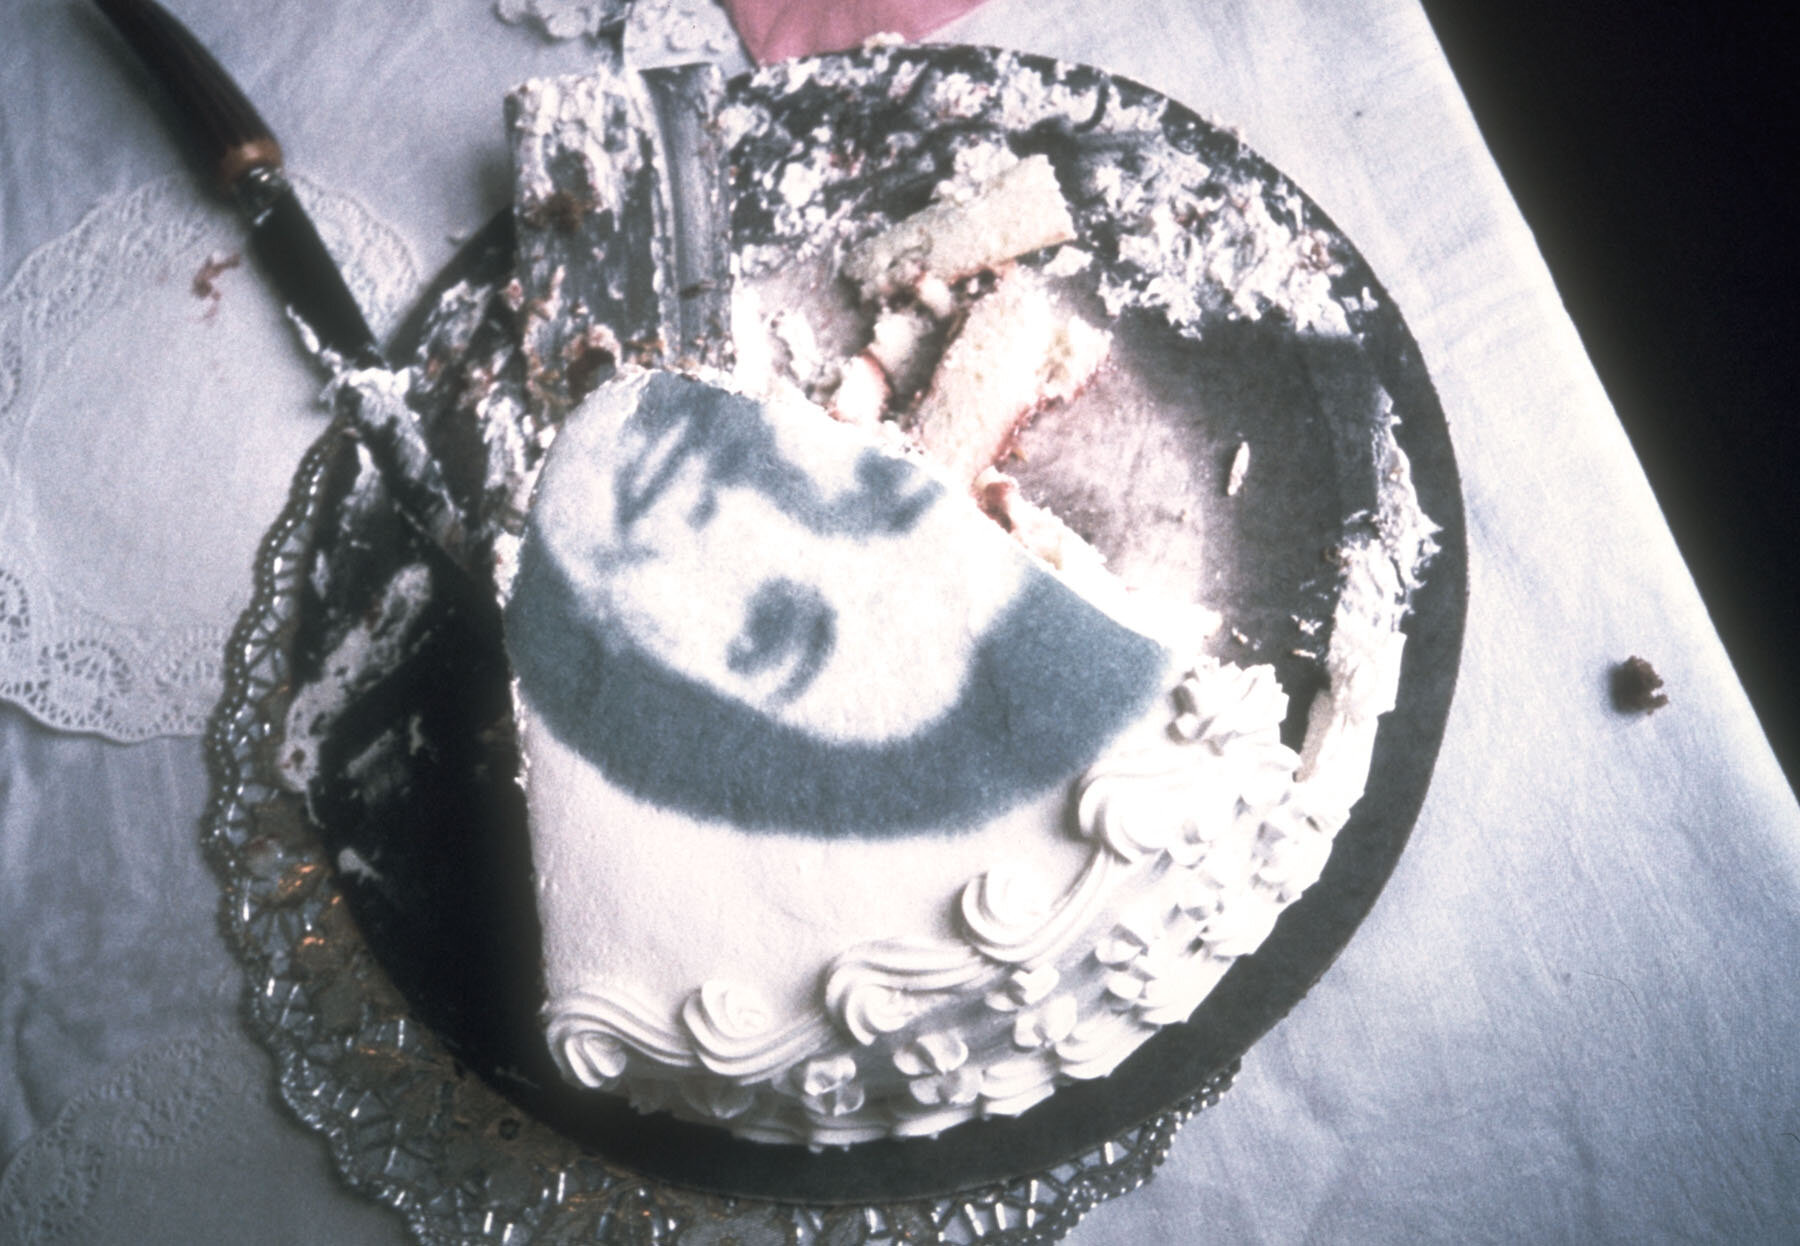   75 Ingredients , detail from performance, 1996, black food coloring on 12-inch edible round cake, silver cake board, doilies, knife 